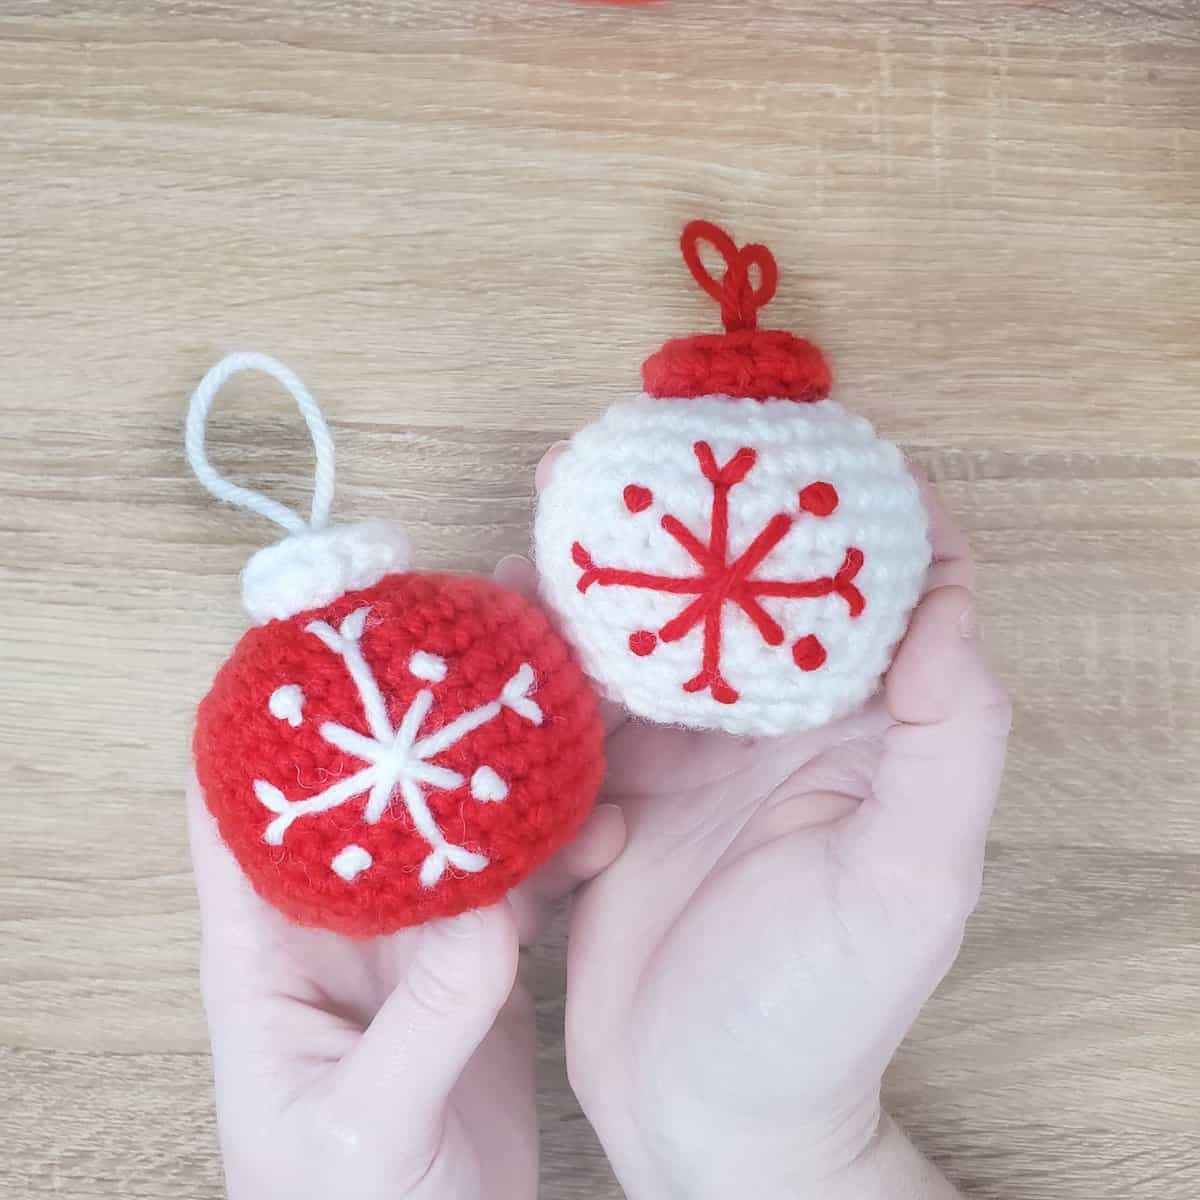 Completed Snowflake Globes